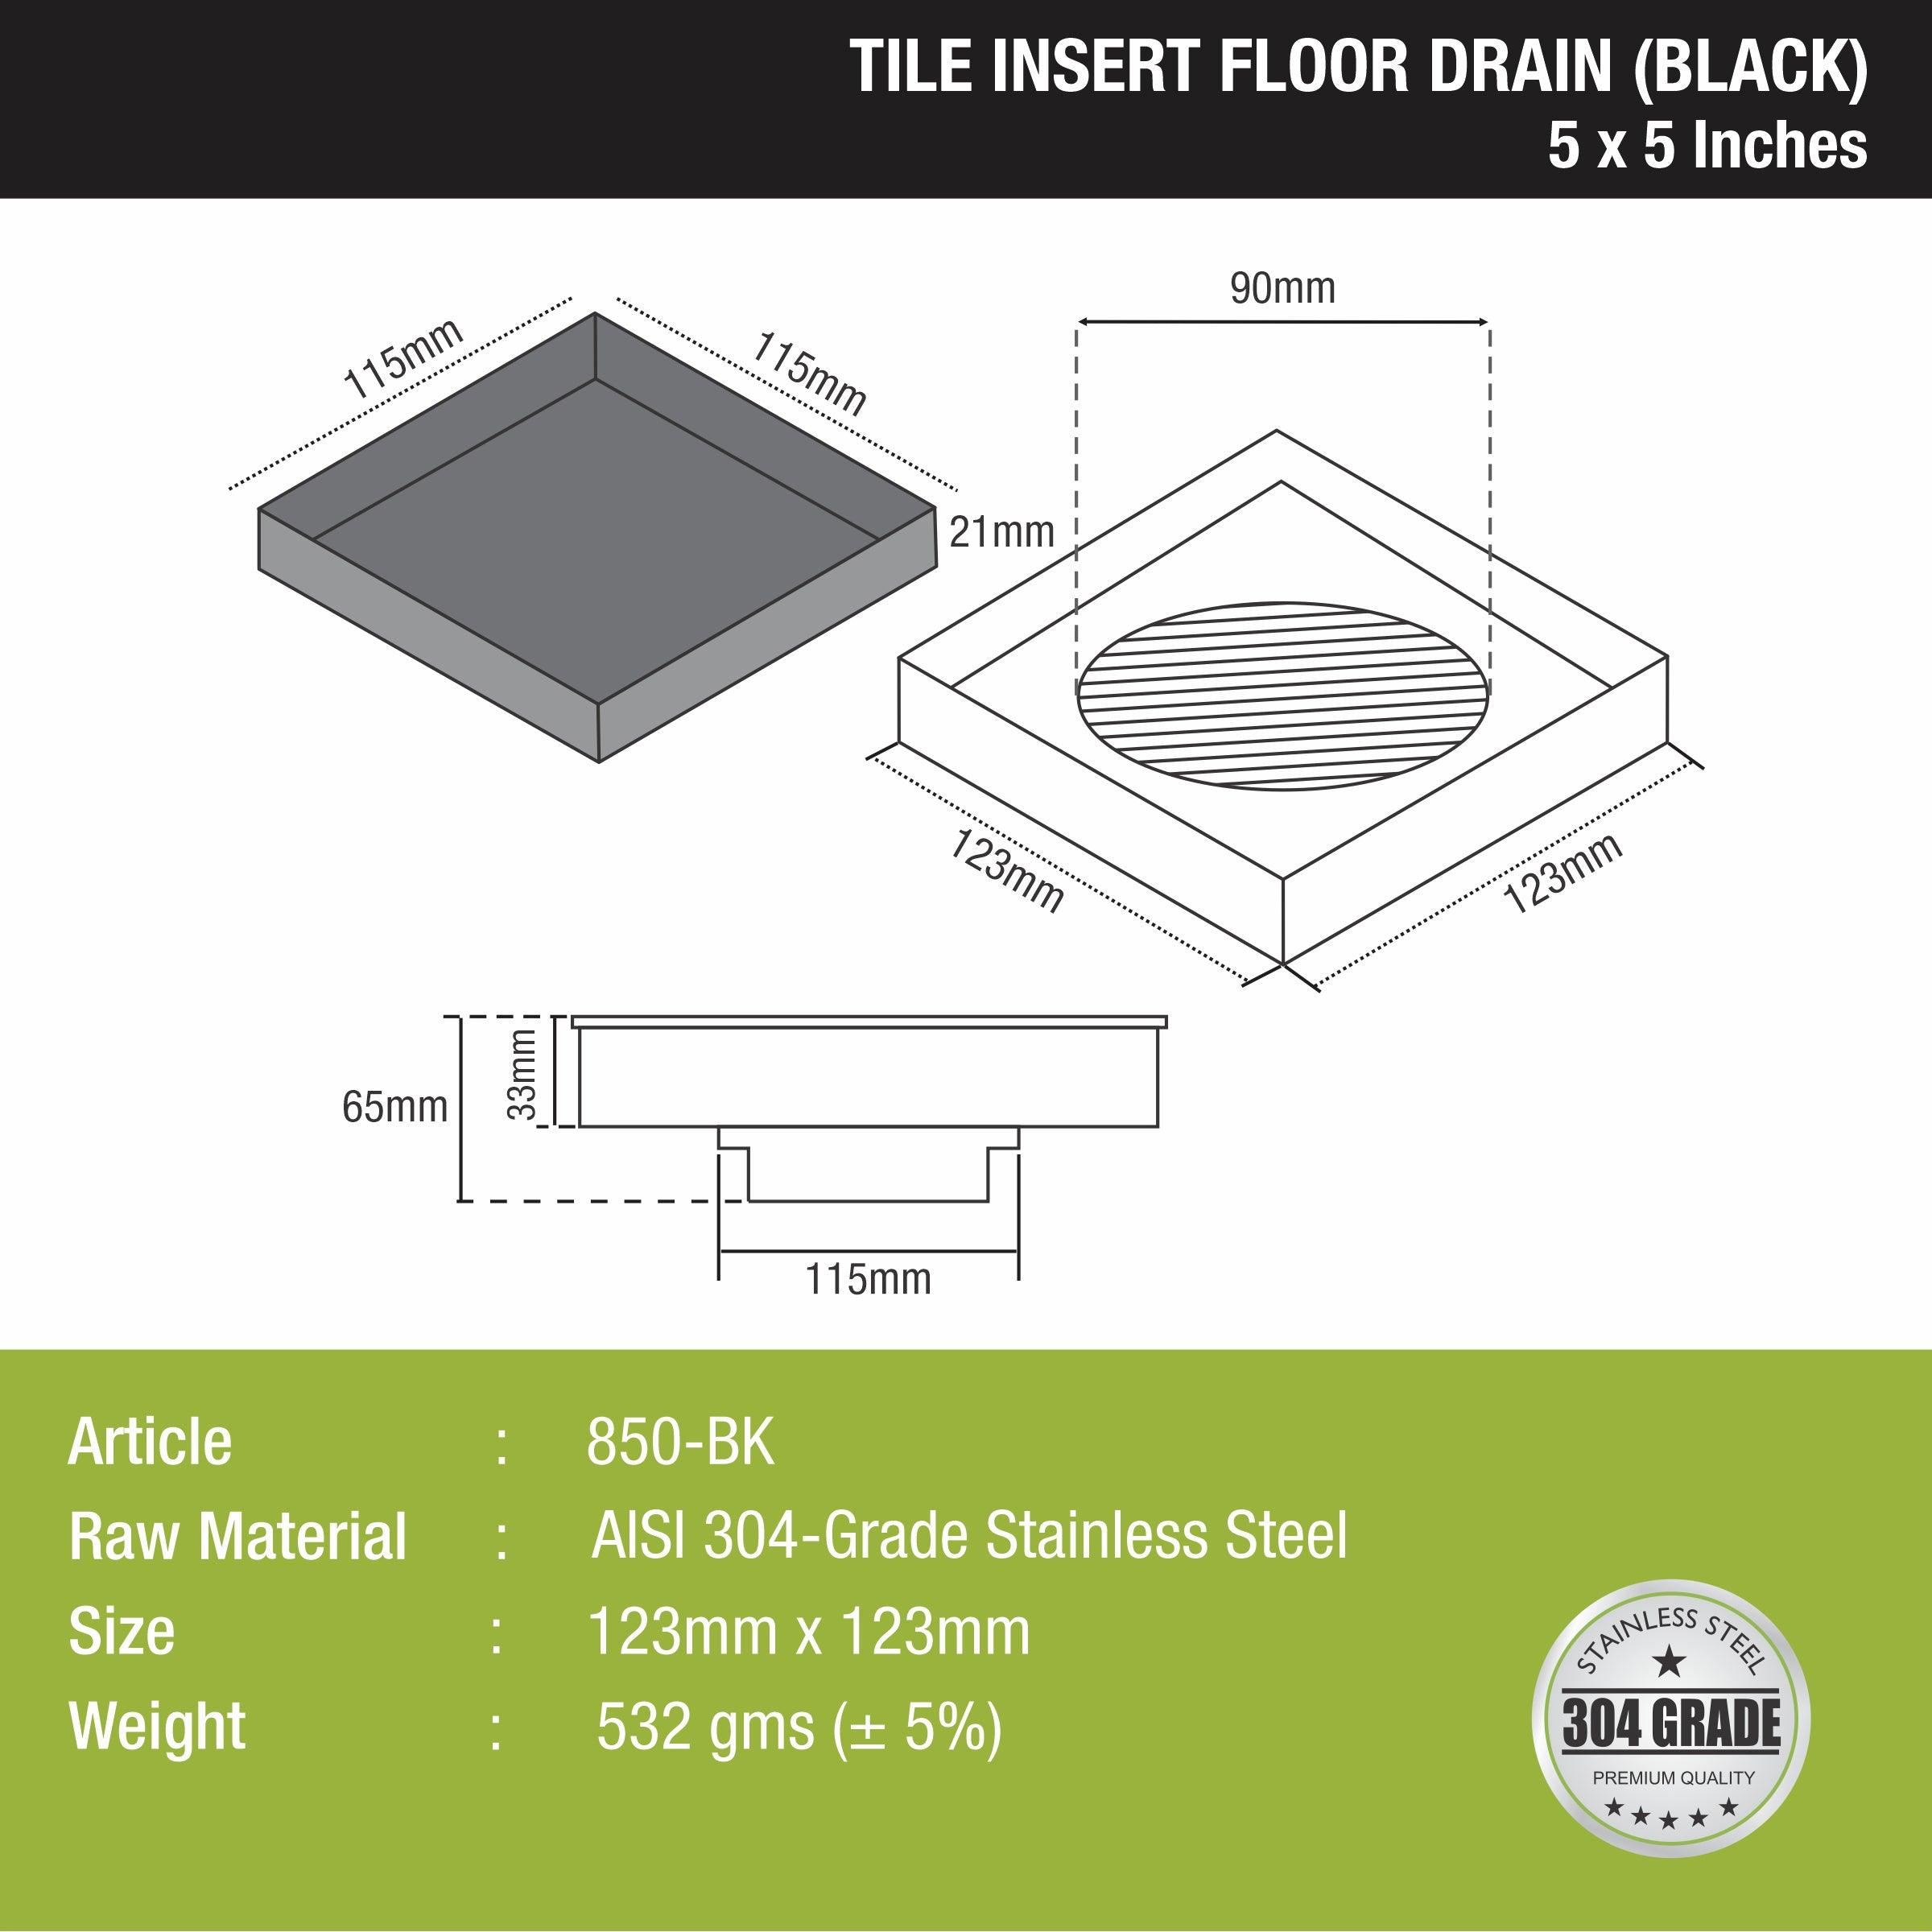 Tile Insert Square Floor Drain - Black (5 x 5 Inches)  size and measurement